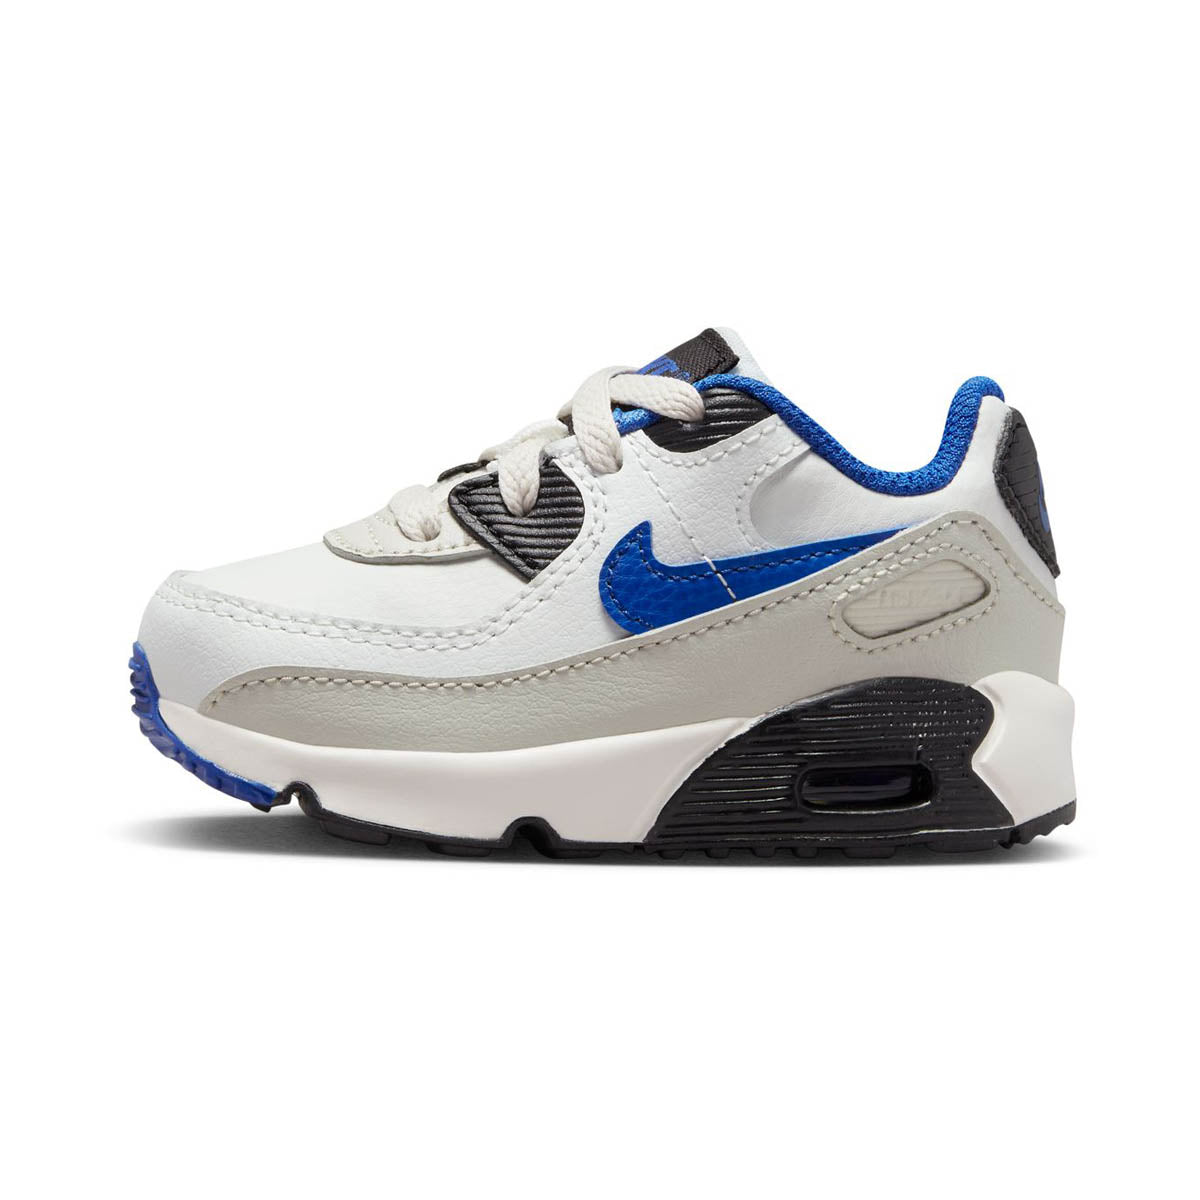 Nike Air Max 90 LTR Baby/Toddler Shoes - Shoes